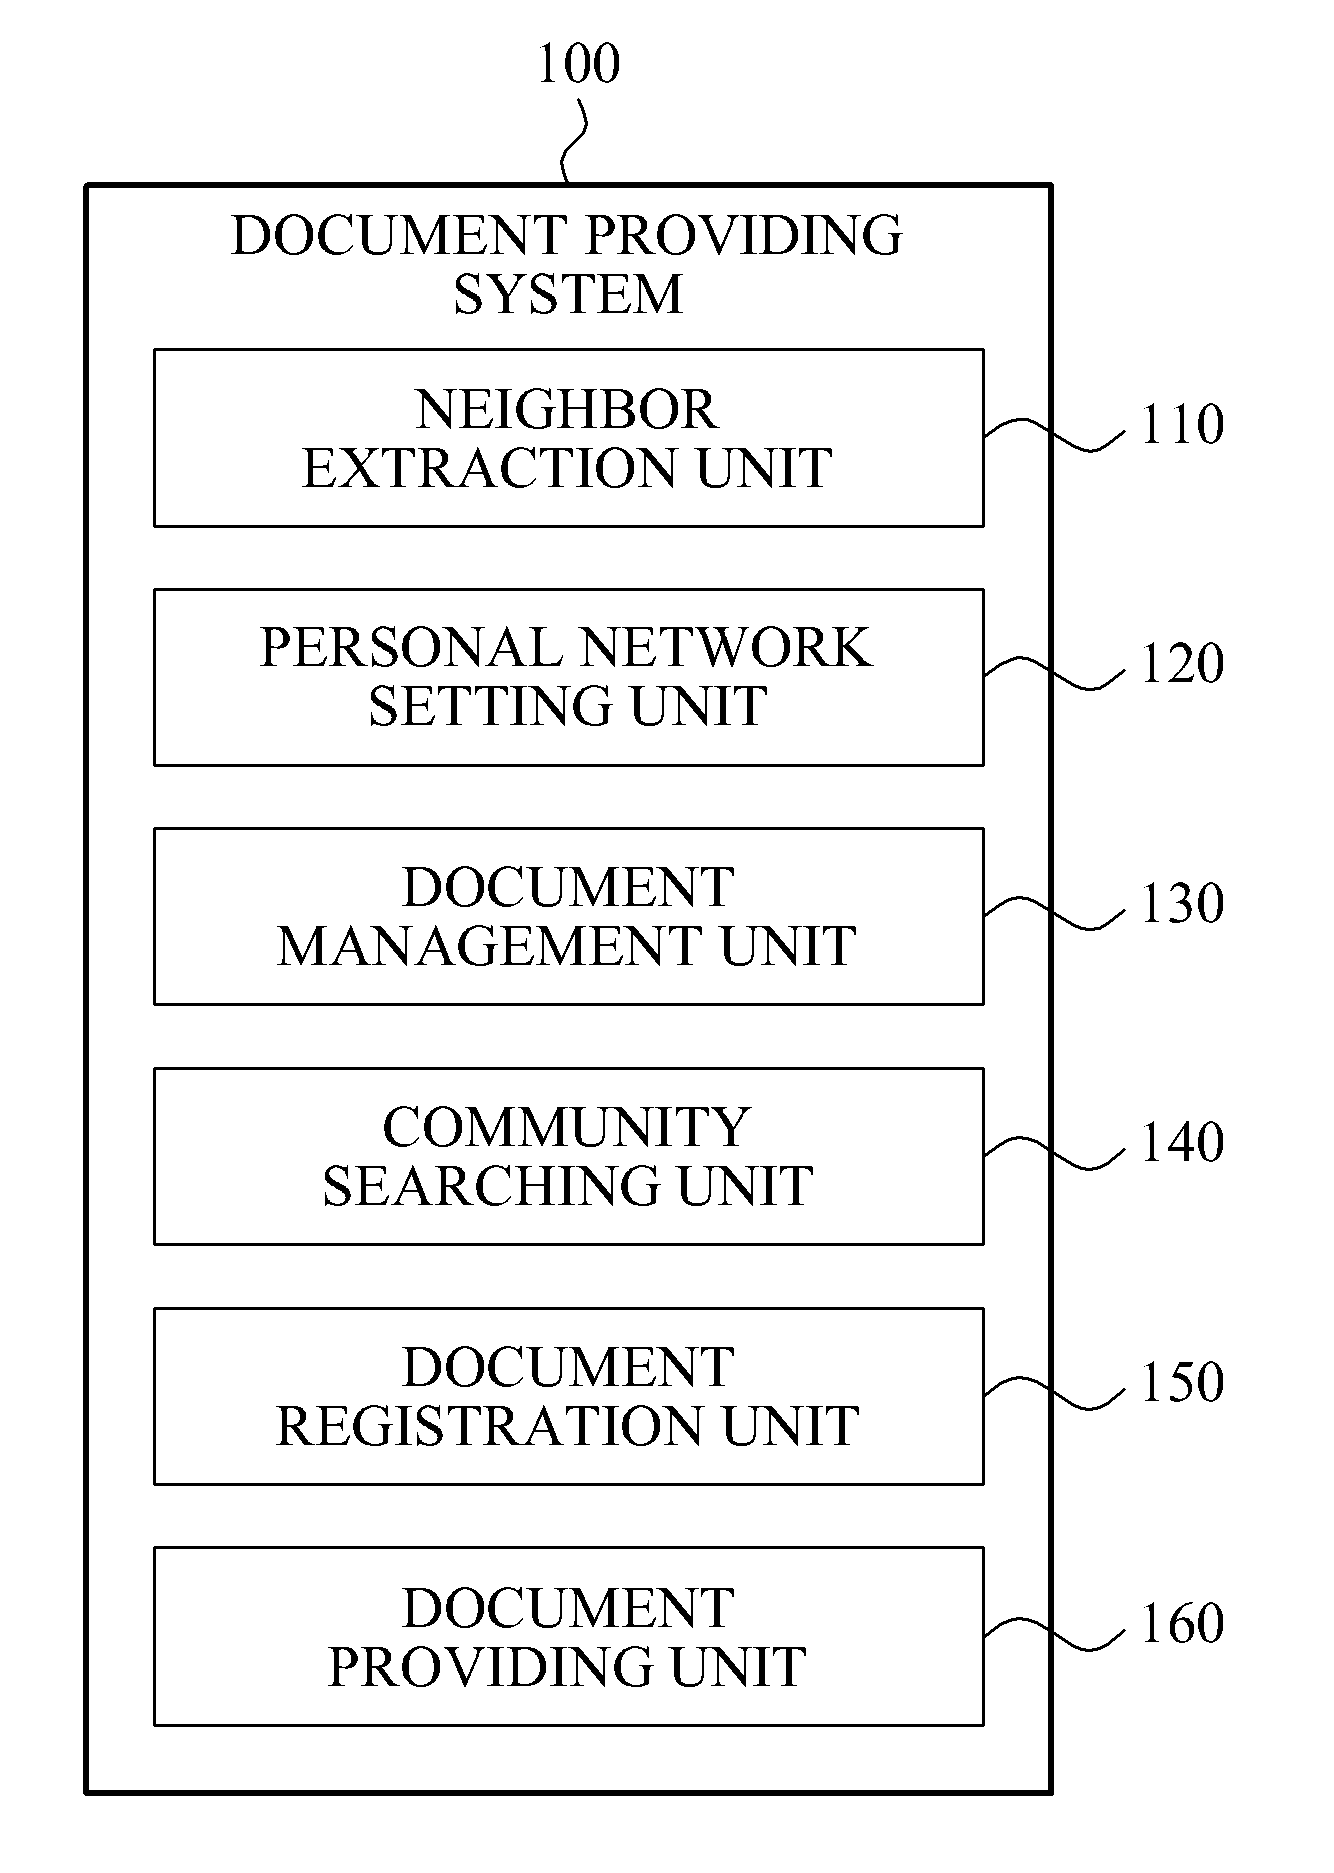 System and method for providing document based on personal network